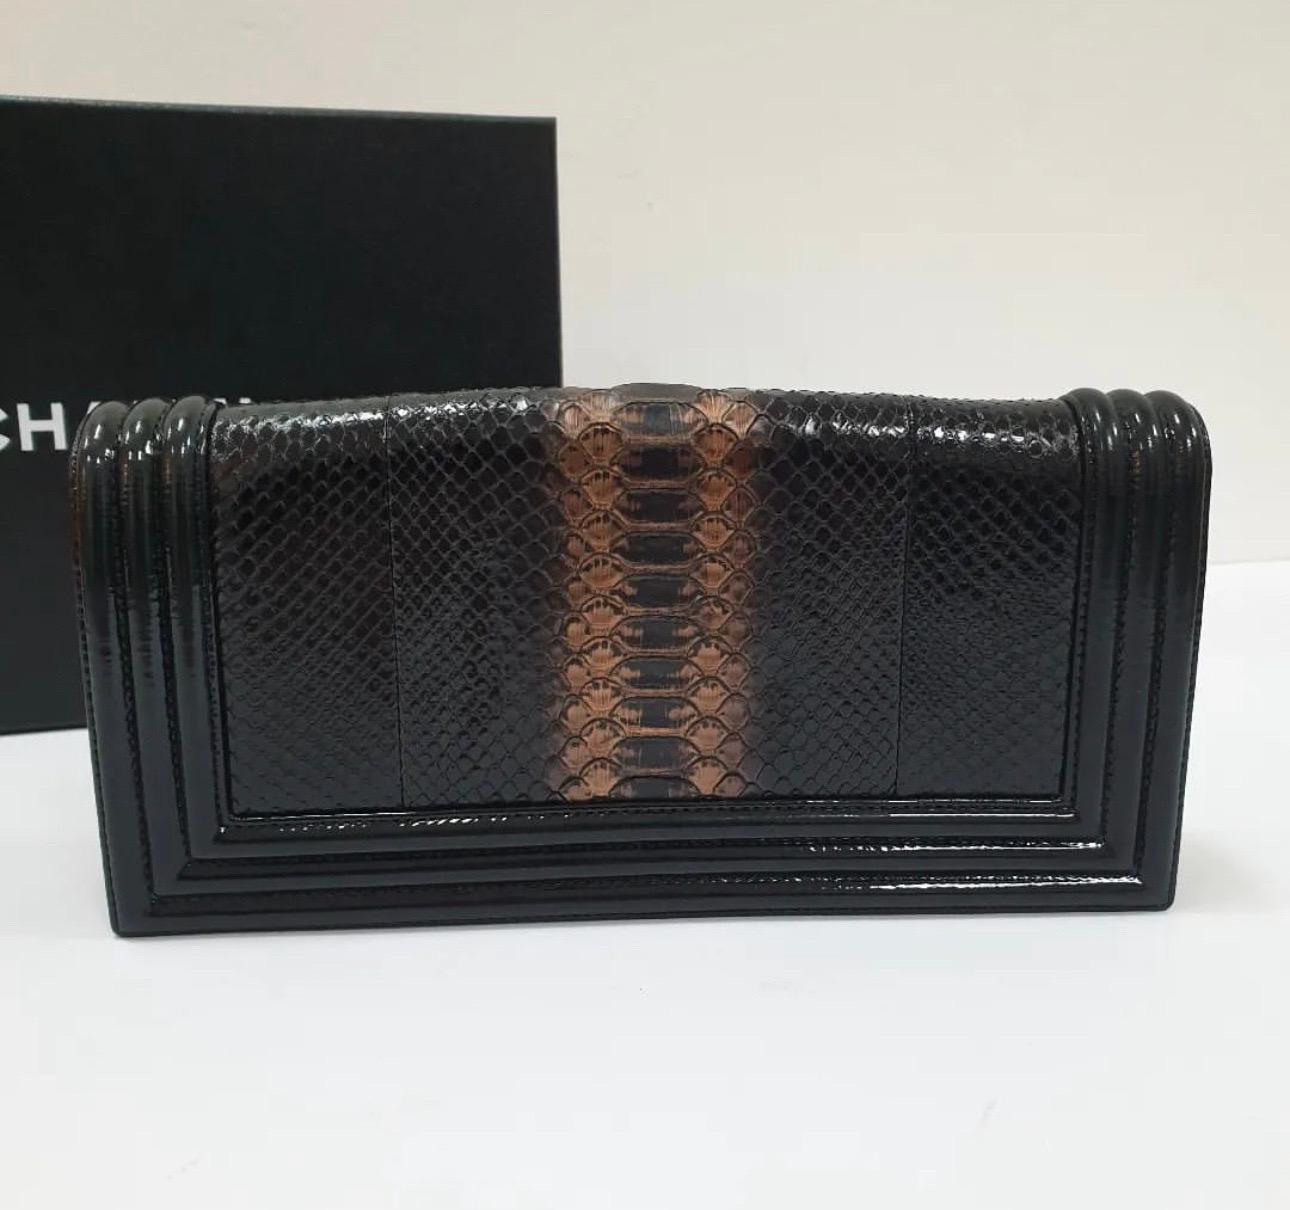 Chanel Python Patent Boy Clutch Bag In Good Condition For Sale In Krakow, PL